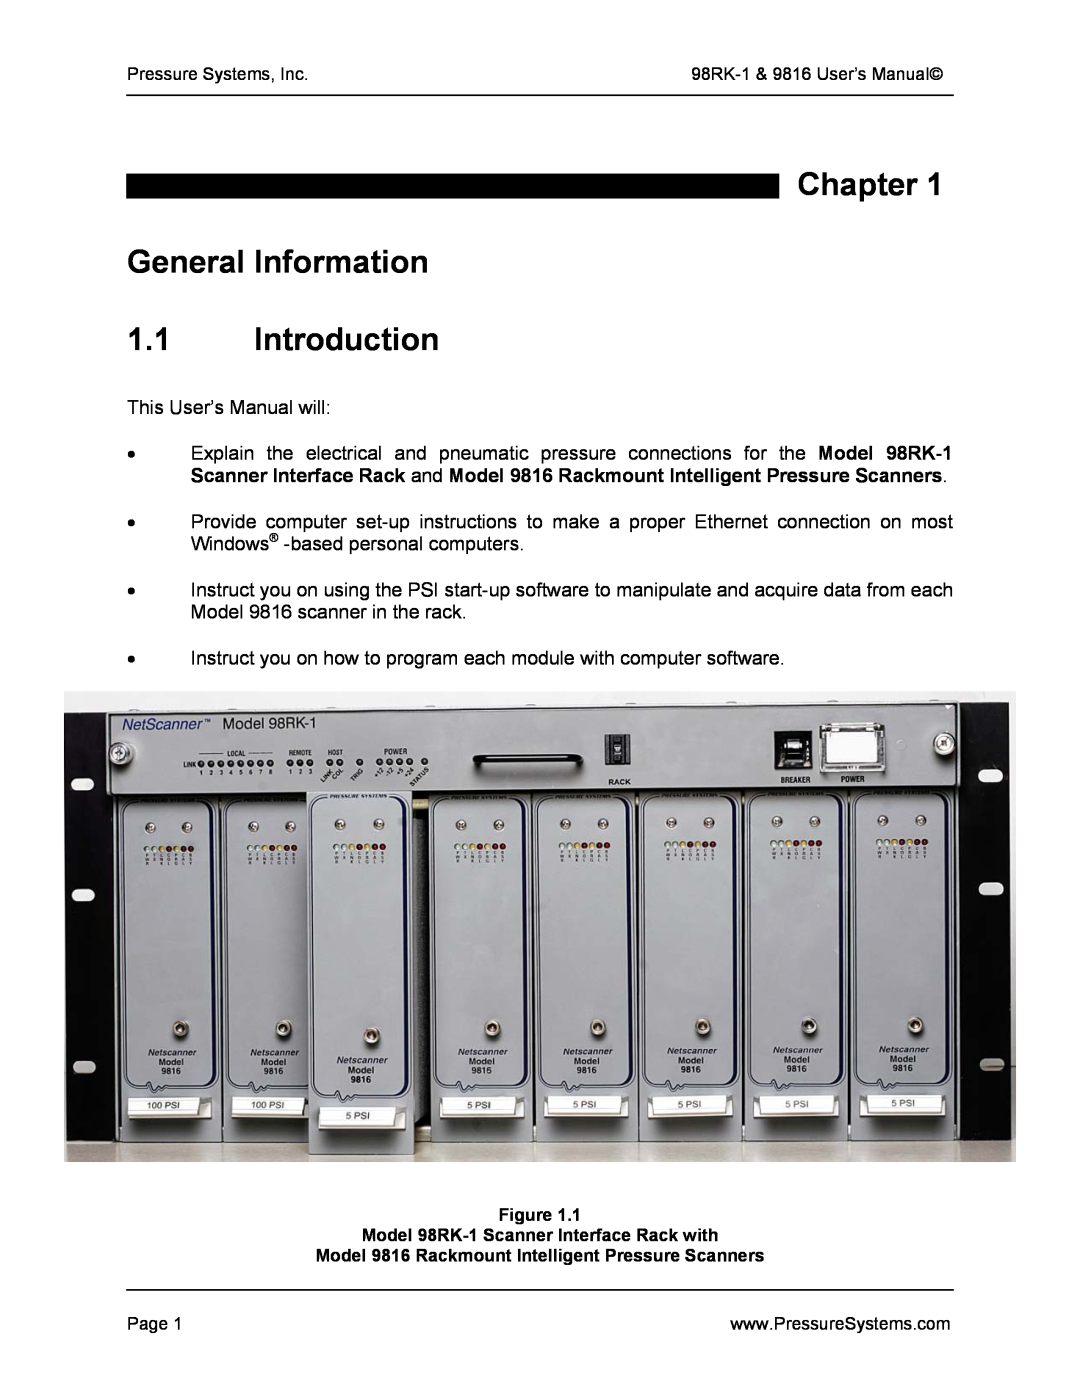 Pressure Systems 98RK-1 user manual Chapter General Information 1.1 Introduction 